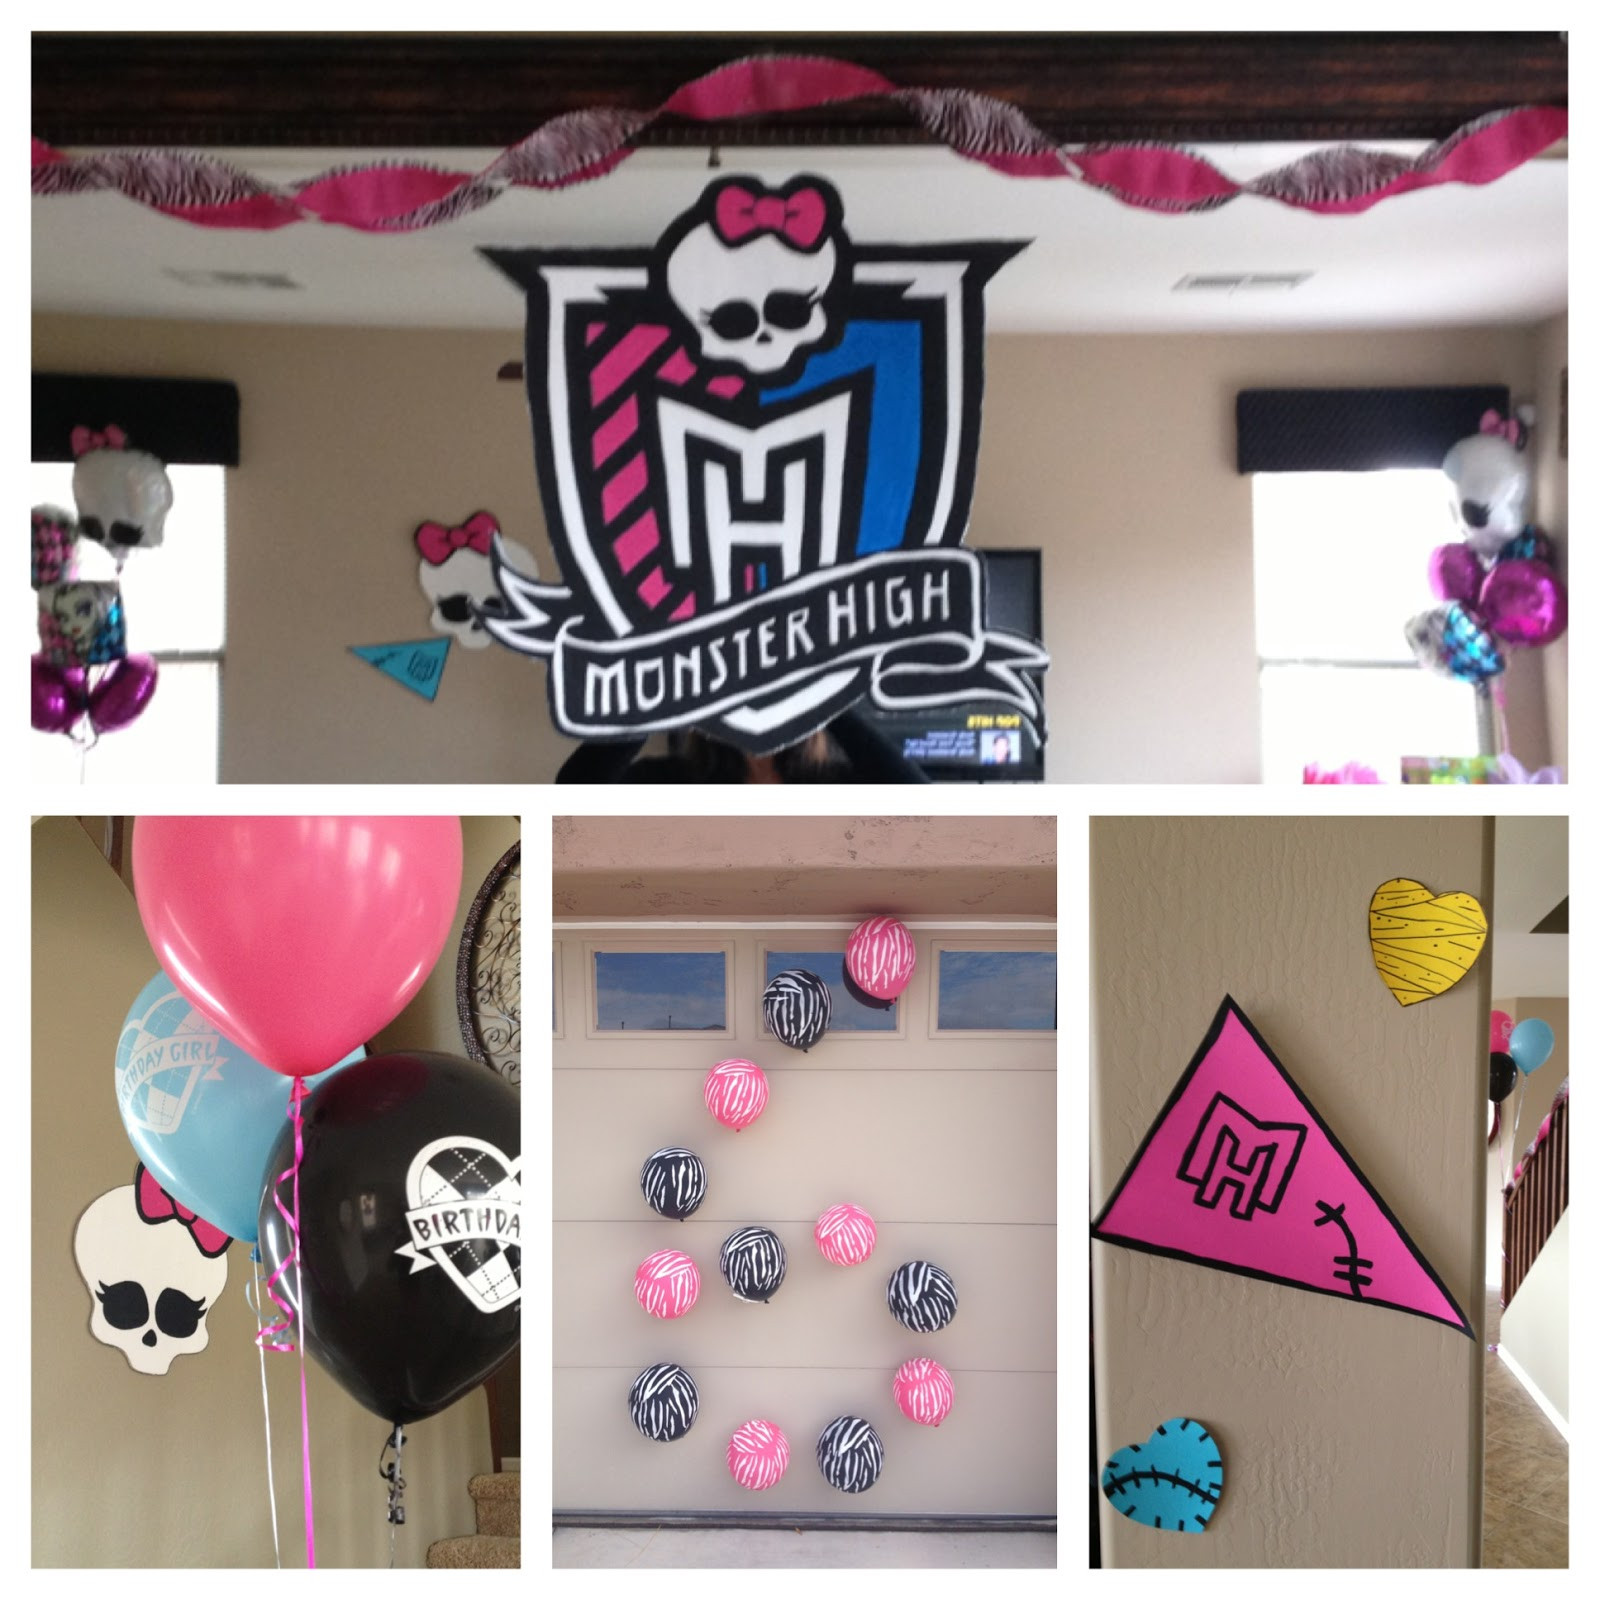 Monster High Birthday Party Supplies
 The Busy Broad Monster High Party Decorations